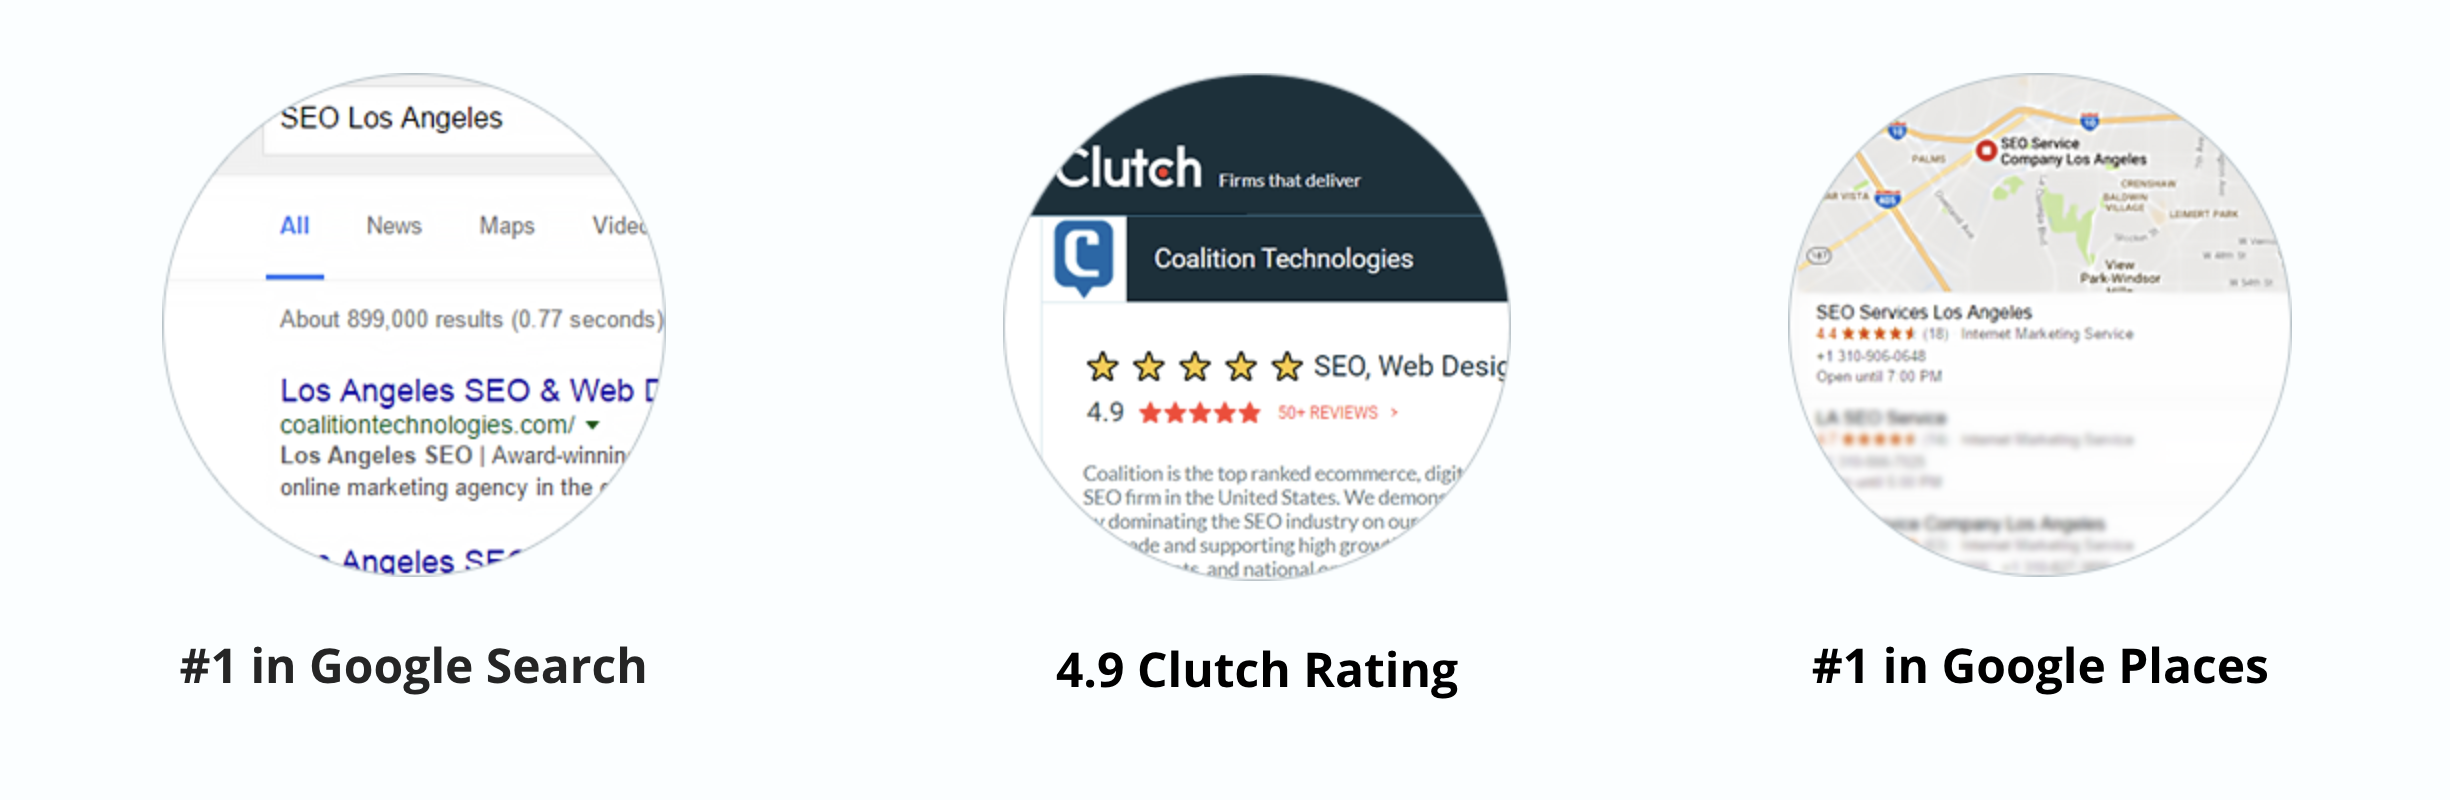 reviews and rankings for an SEO company